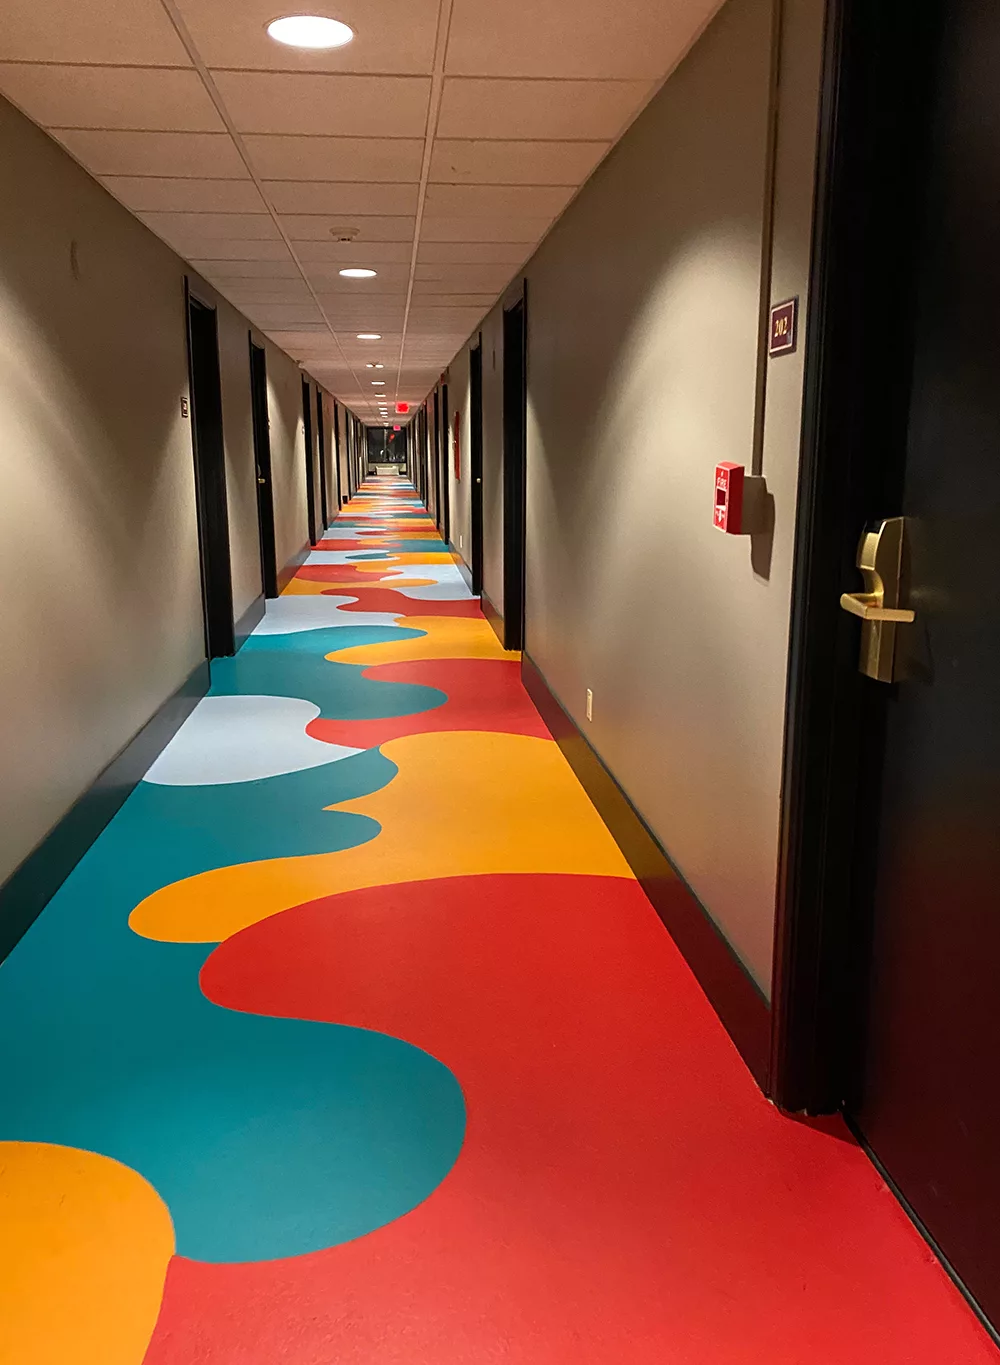 Hallway with red, orange and teal blobs painted on the floor